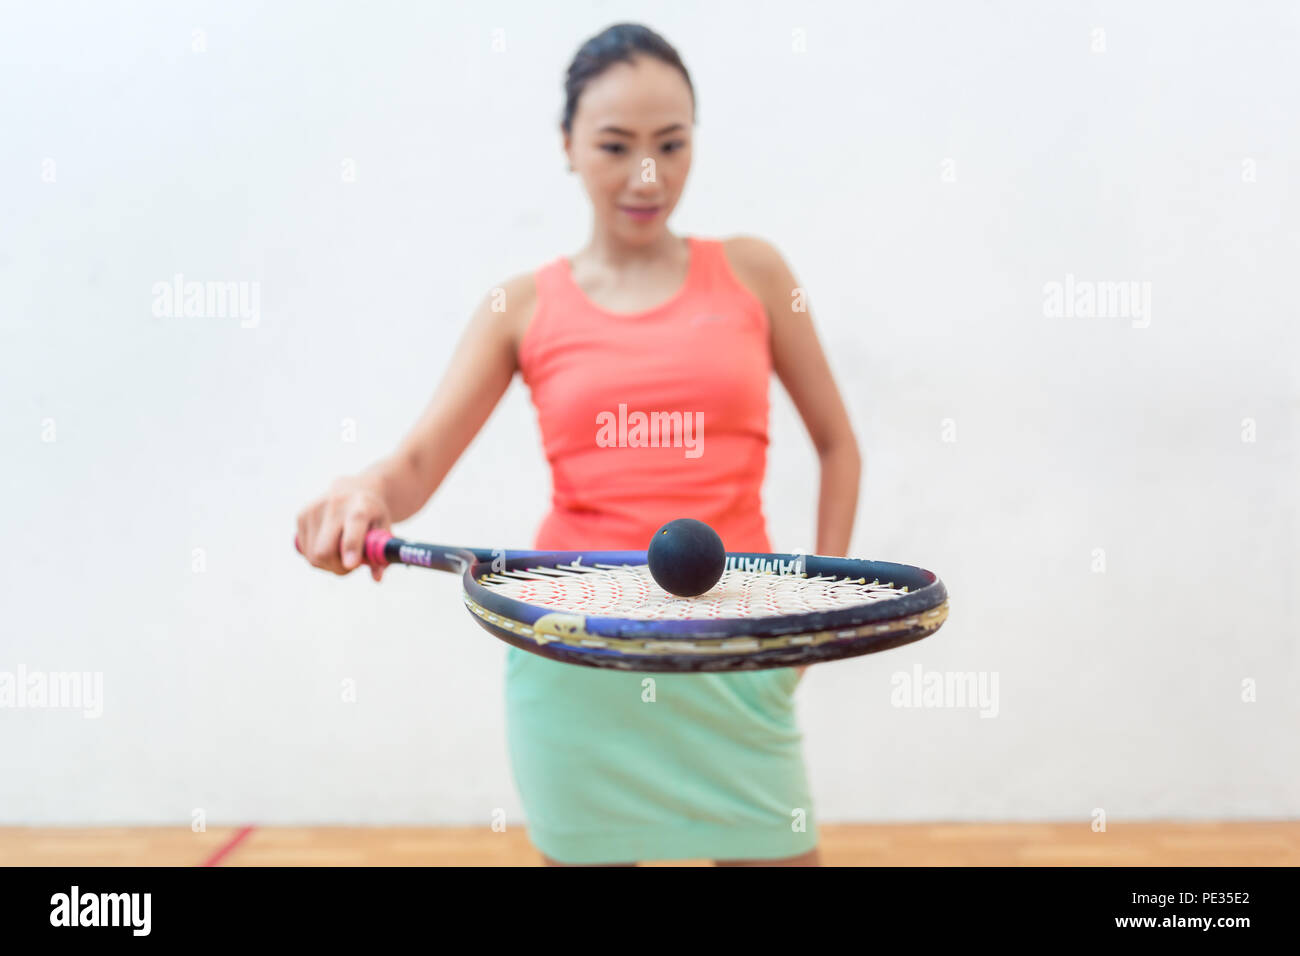 Close-up of a rubber hollow ball on the new squash racket of a fit woman Stock Photo